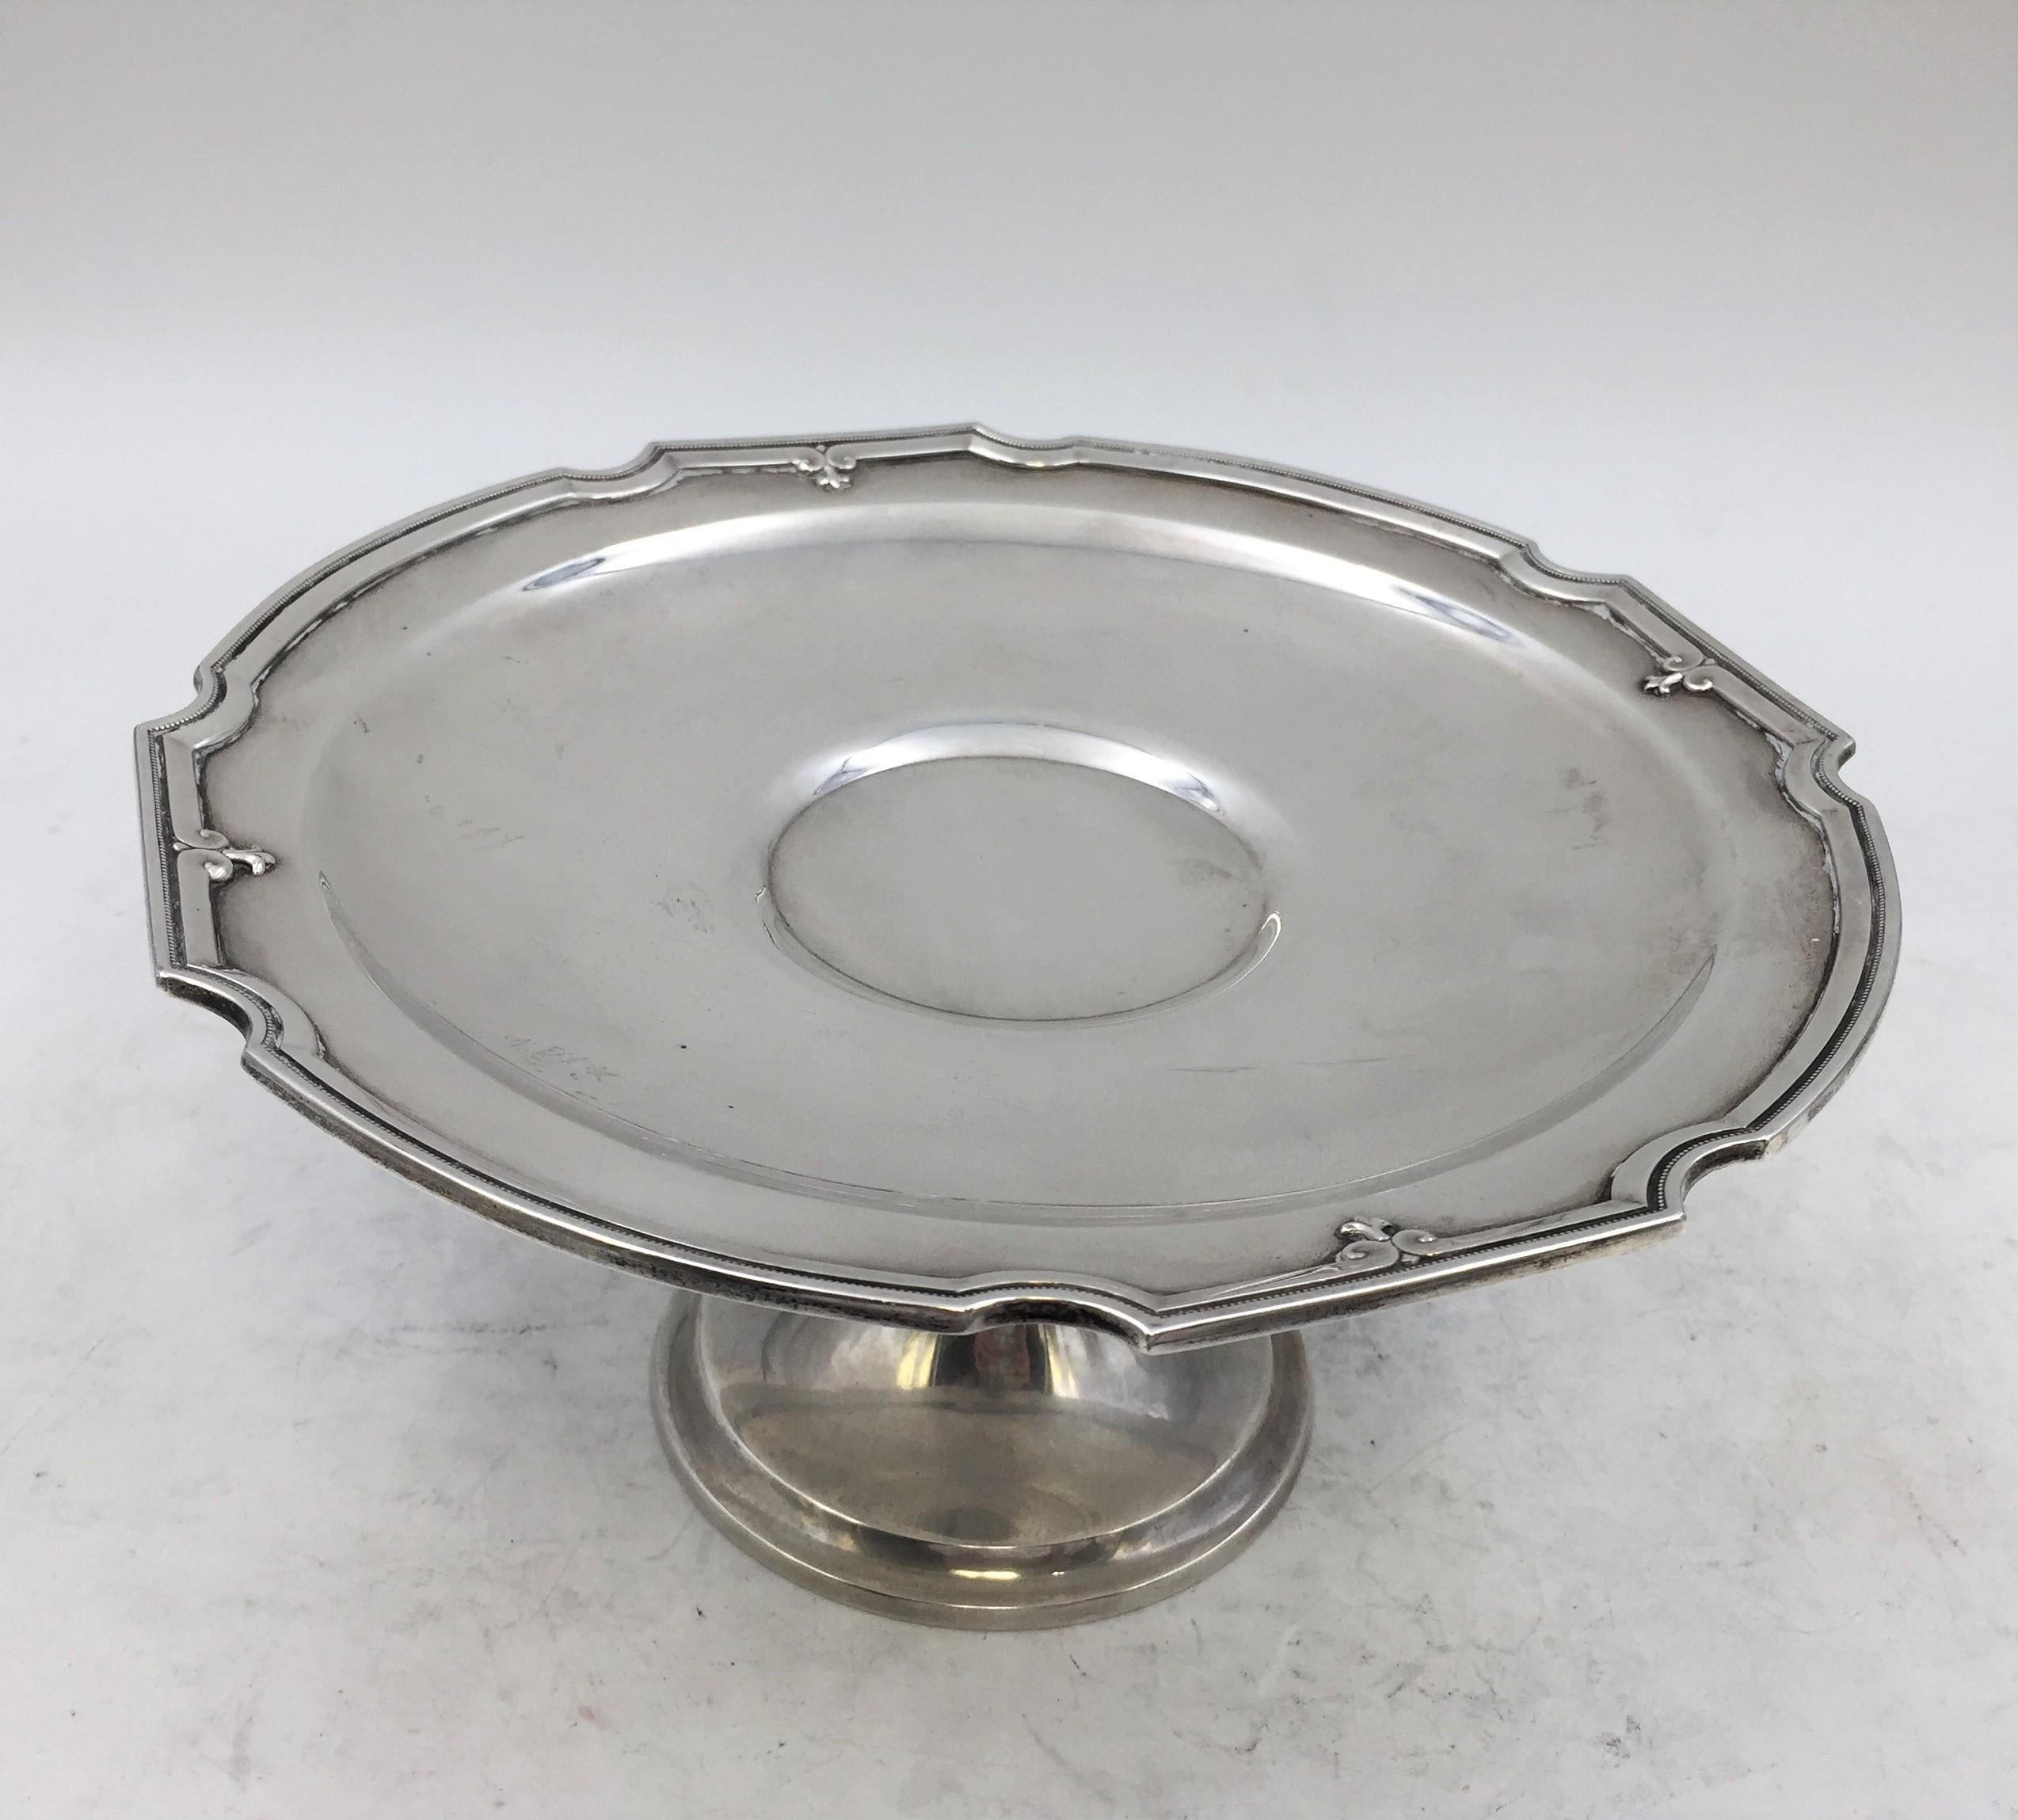 Sterling silver compote / footed centerpiece dish from 1927 by Gorham and Whiting, a Gorham subsidiary, with beaded and fleur-de-lys designs across the rims in King Albert pattern measuring 9'' in diameter and 4 2/3'' in height and weighing 29.4